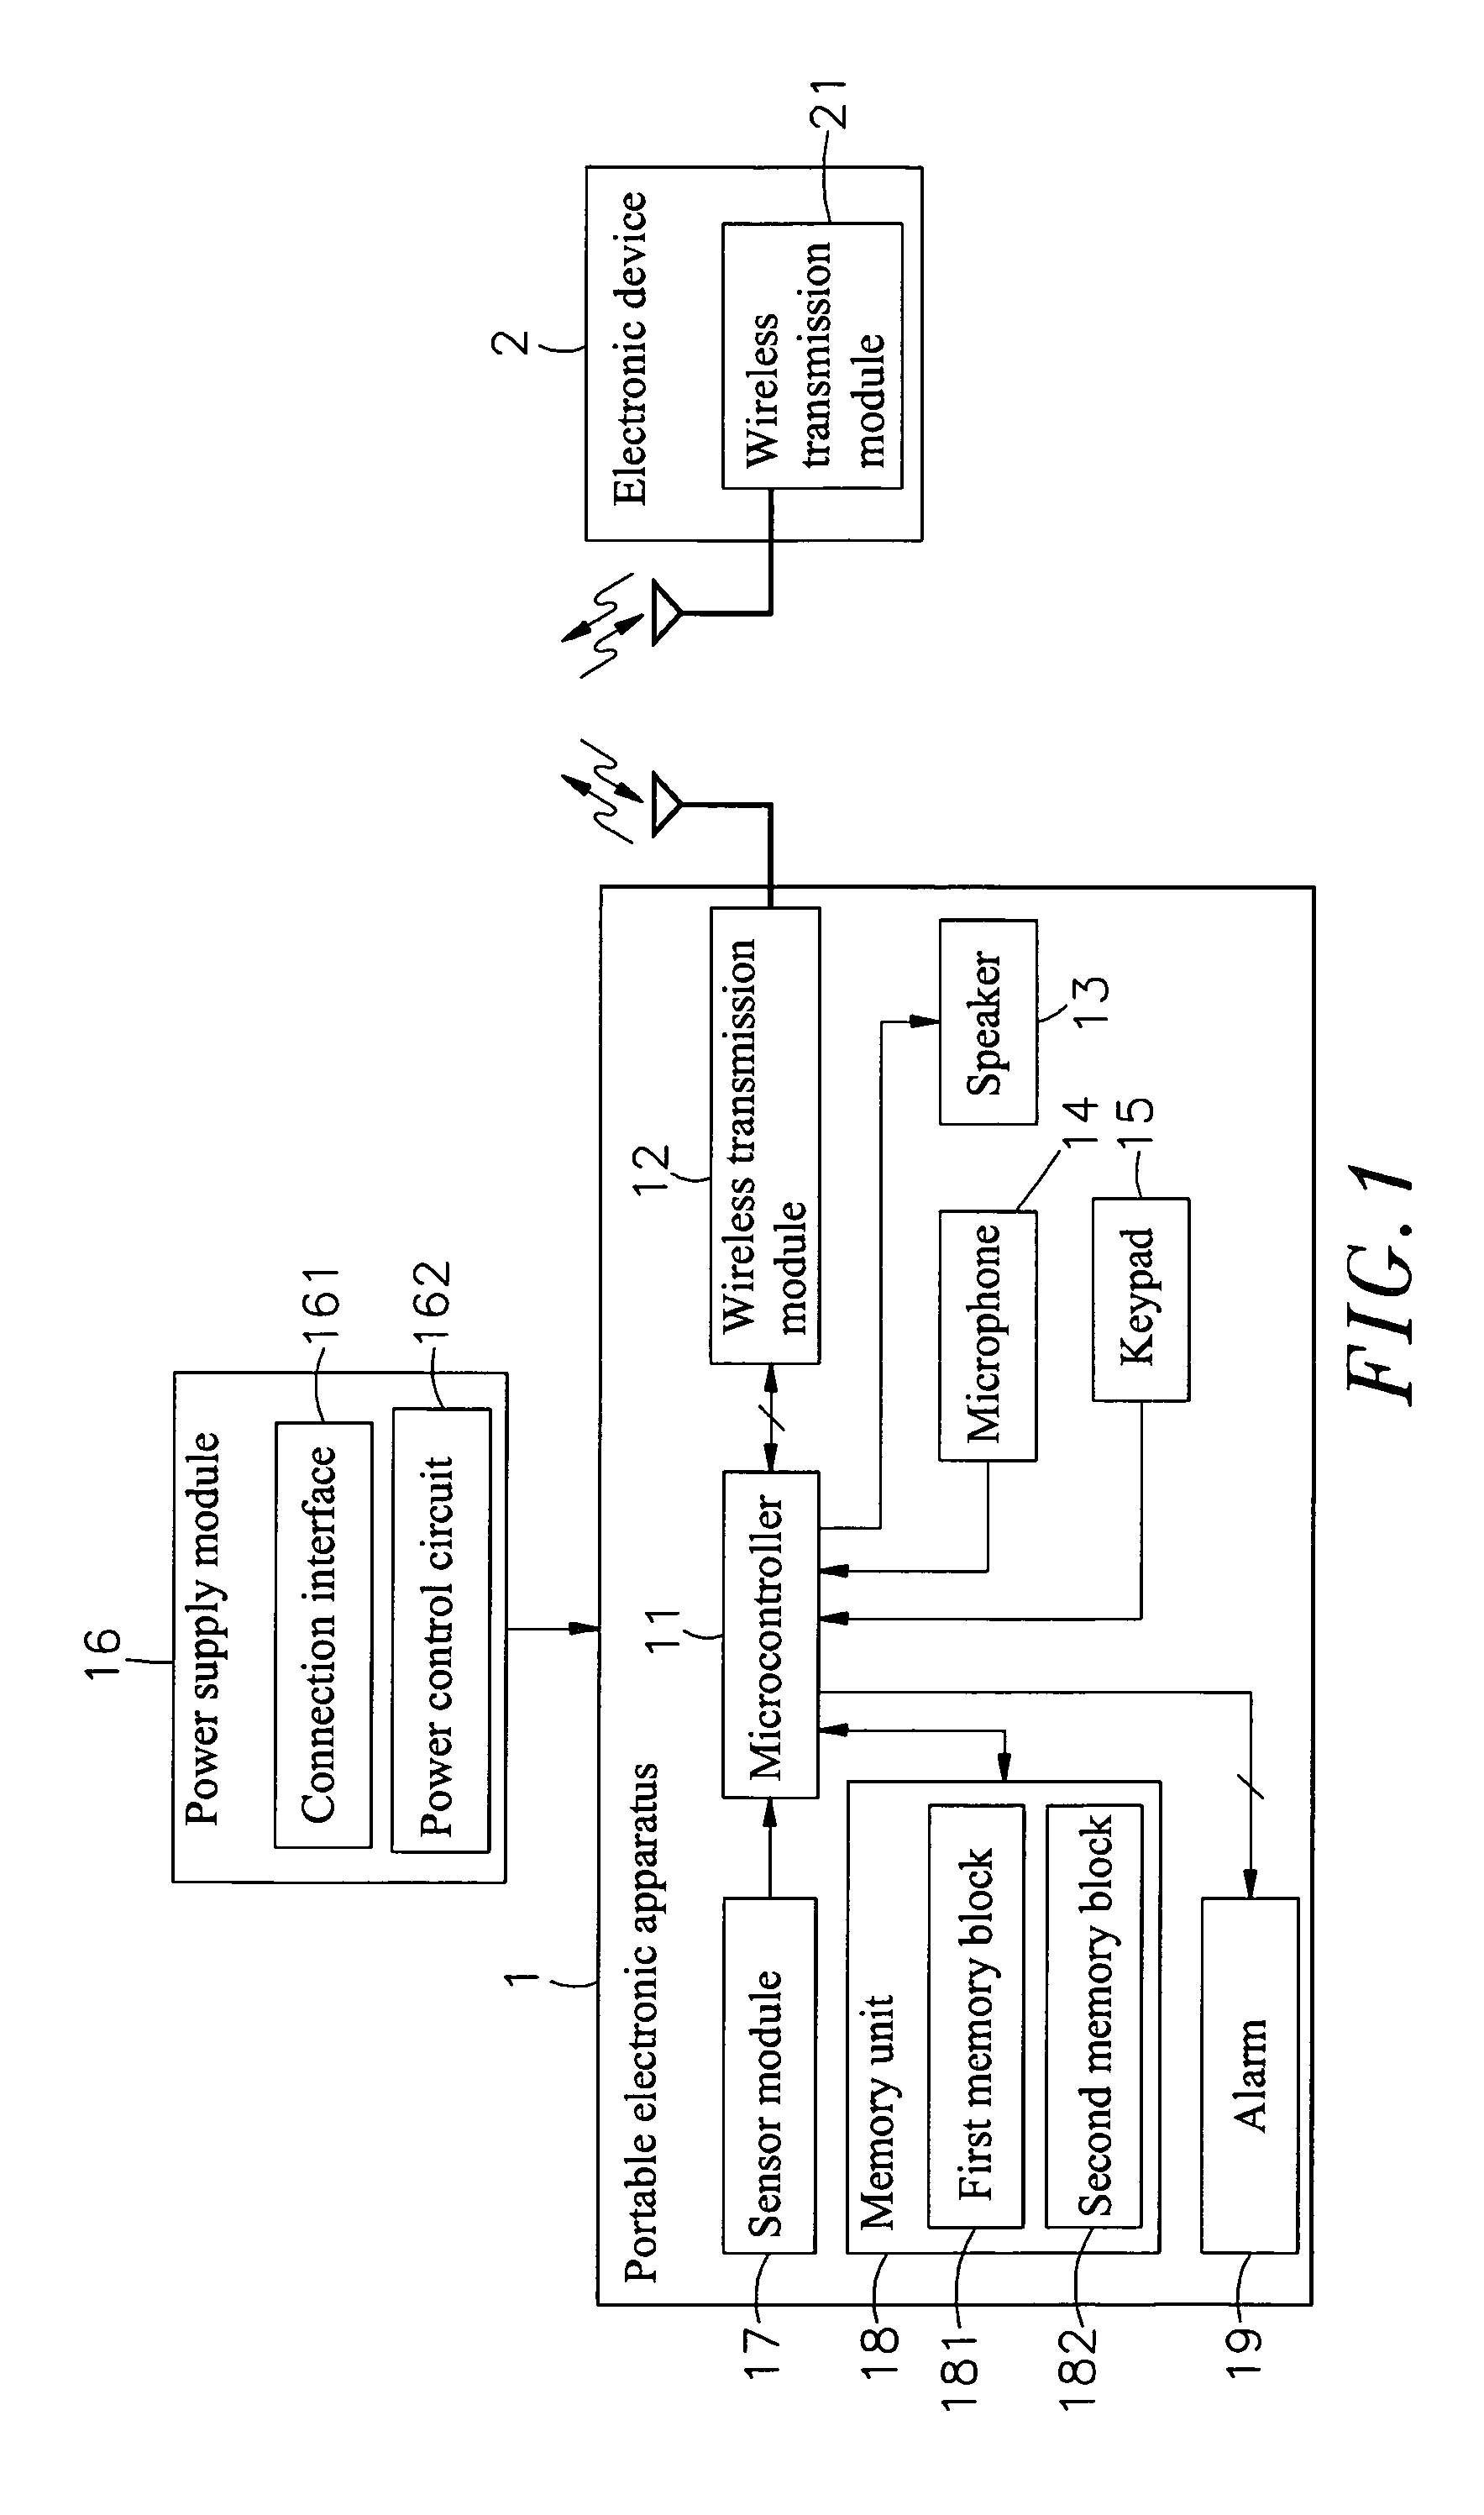 Portable electronic apparatus with a user physical status sensing and warning circuit